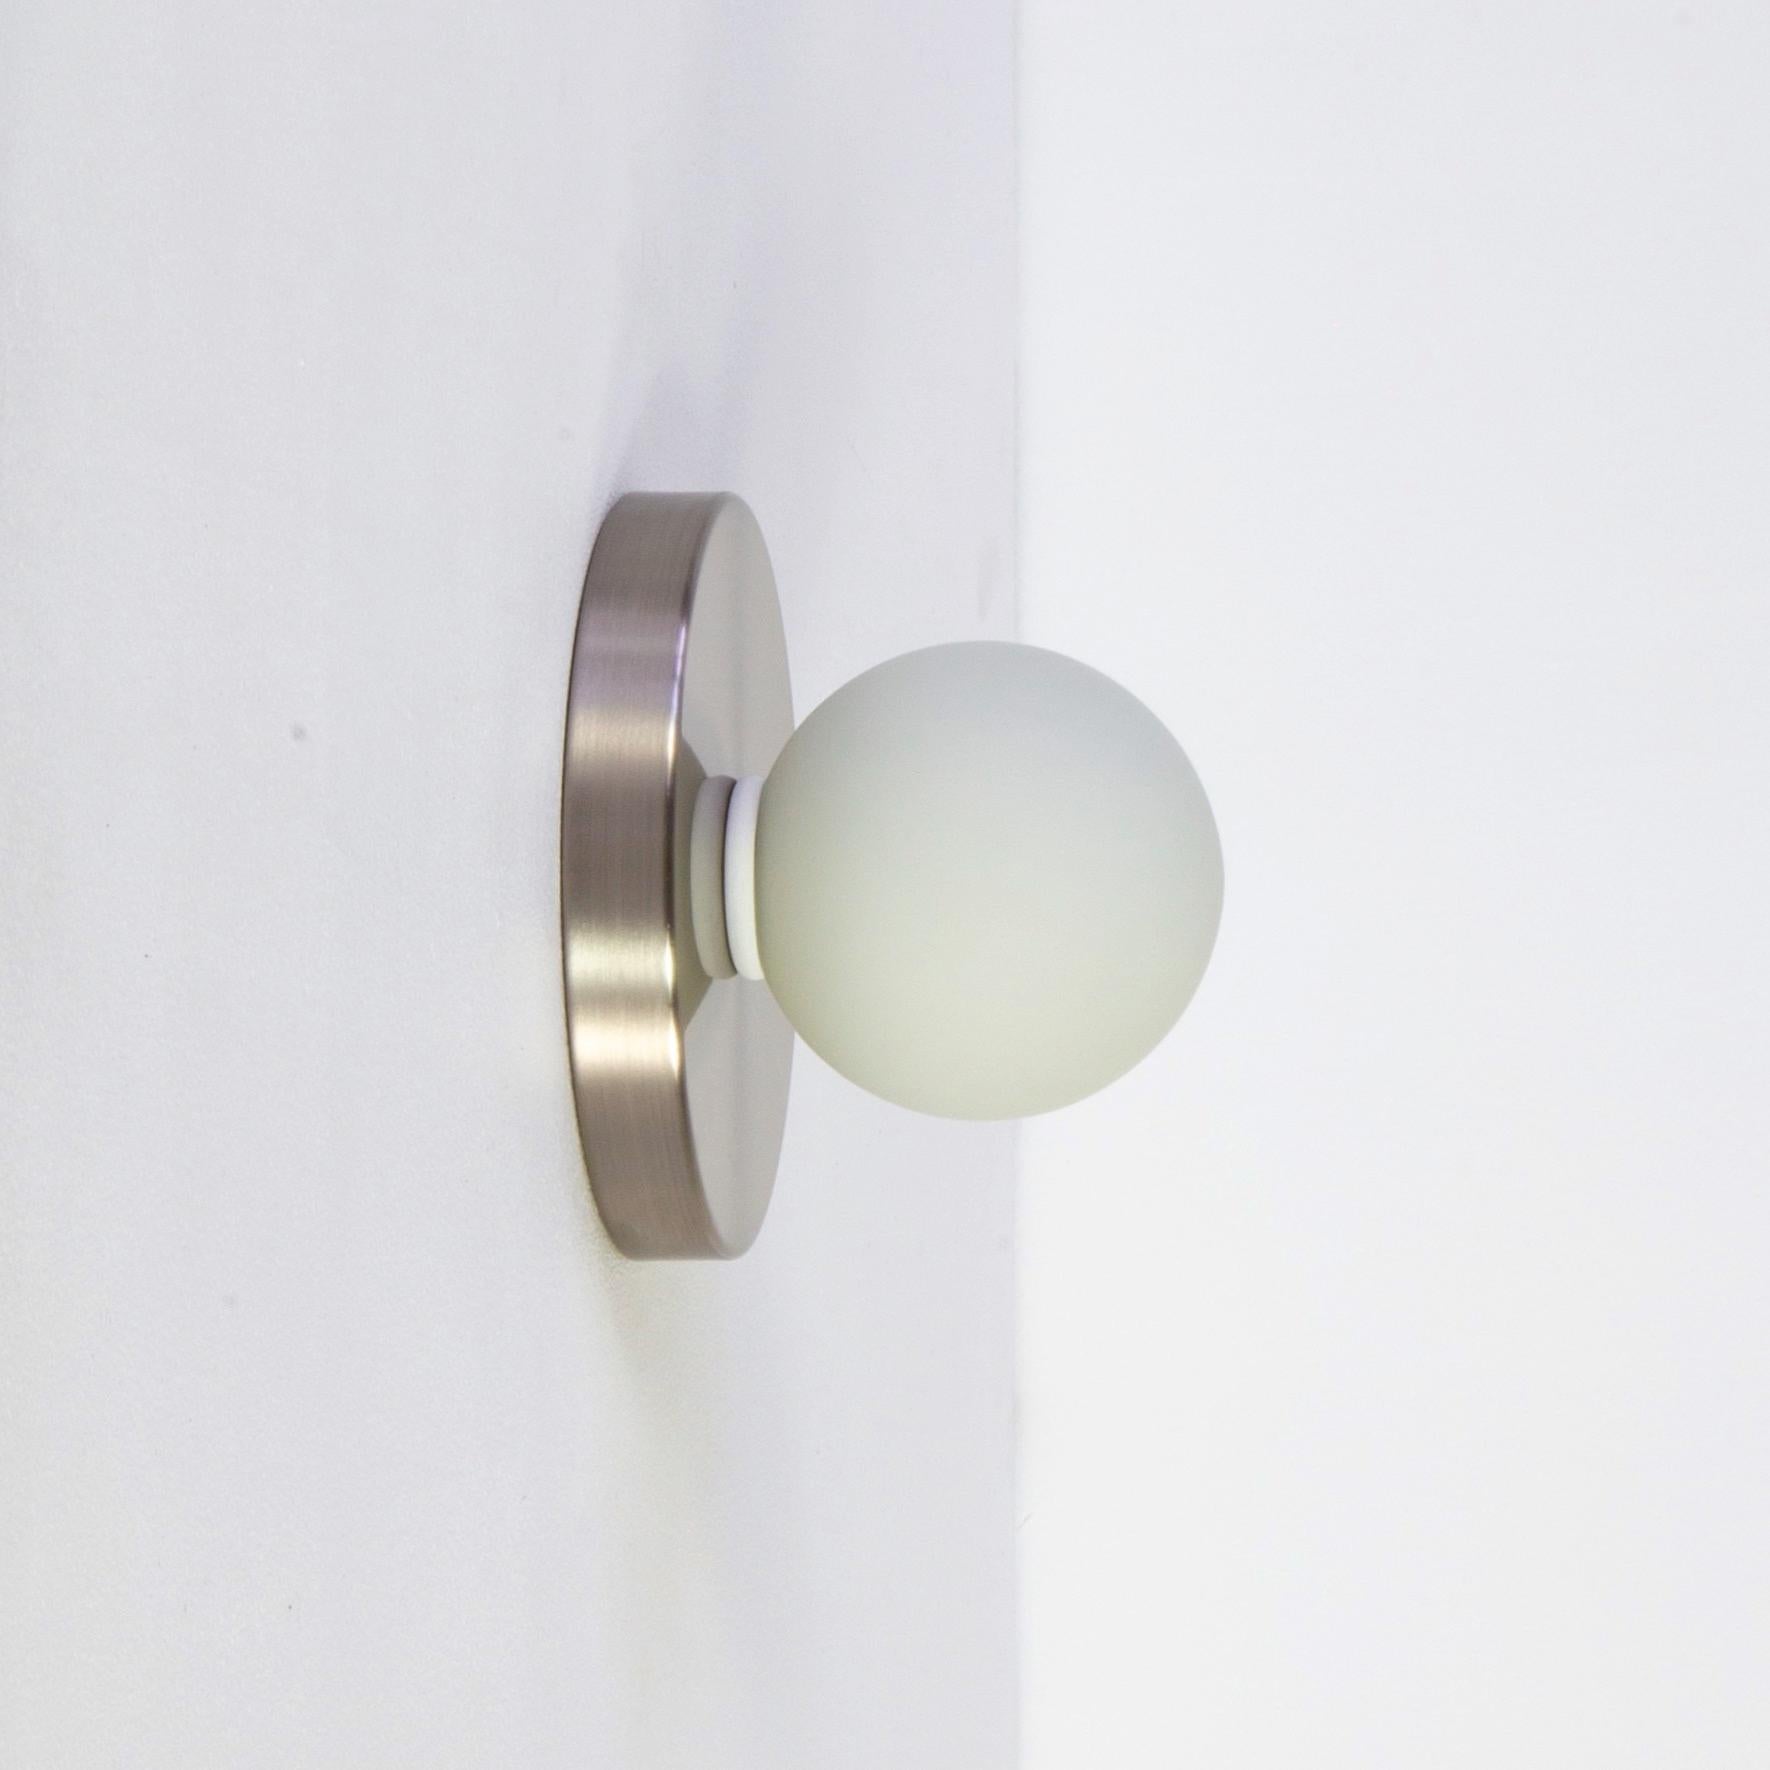 This listing is for 2x Globe Sconces in brushed nickel designed and manufactured by Research.Lighting.

Materials: Brass, Steel & Glass
Finish: Brushed Nickel
Electronics: 1x G9 Socket, 1x 4.5 Watt LED Bulb (included), 450 Lumens
ADA Compliant. UL